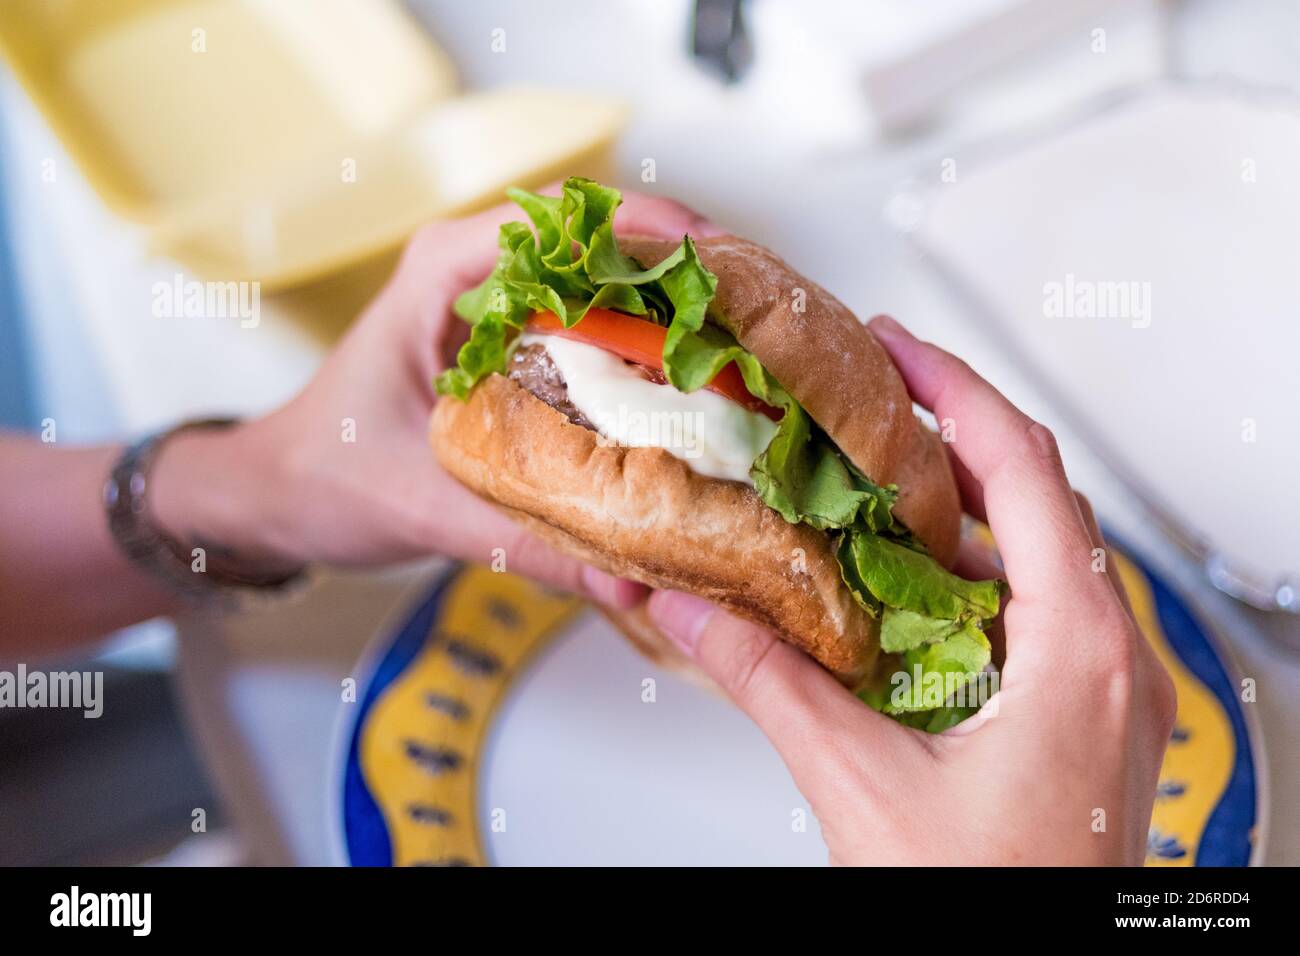 human hands holding a ready to eat cheeseburger with lettuce and tomato Stock Photo